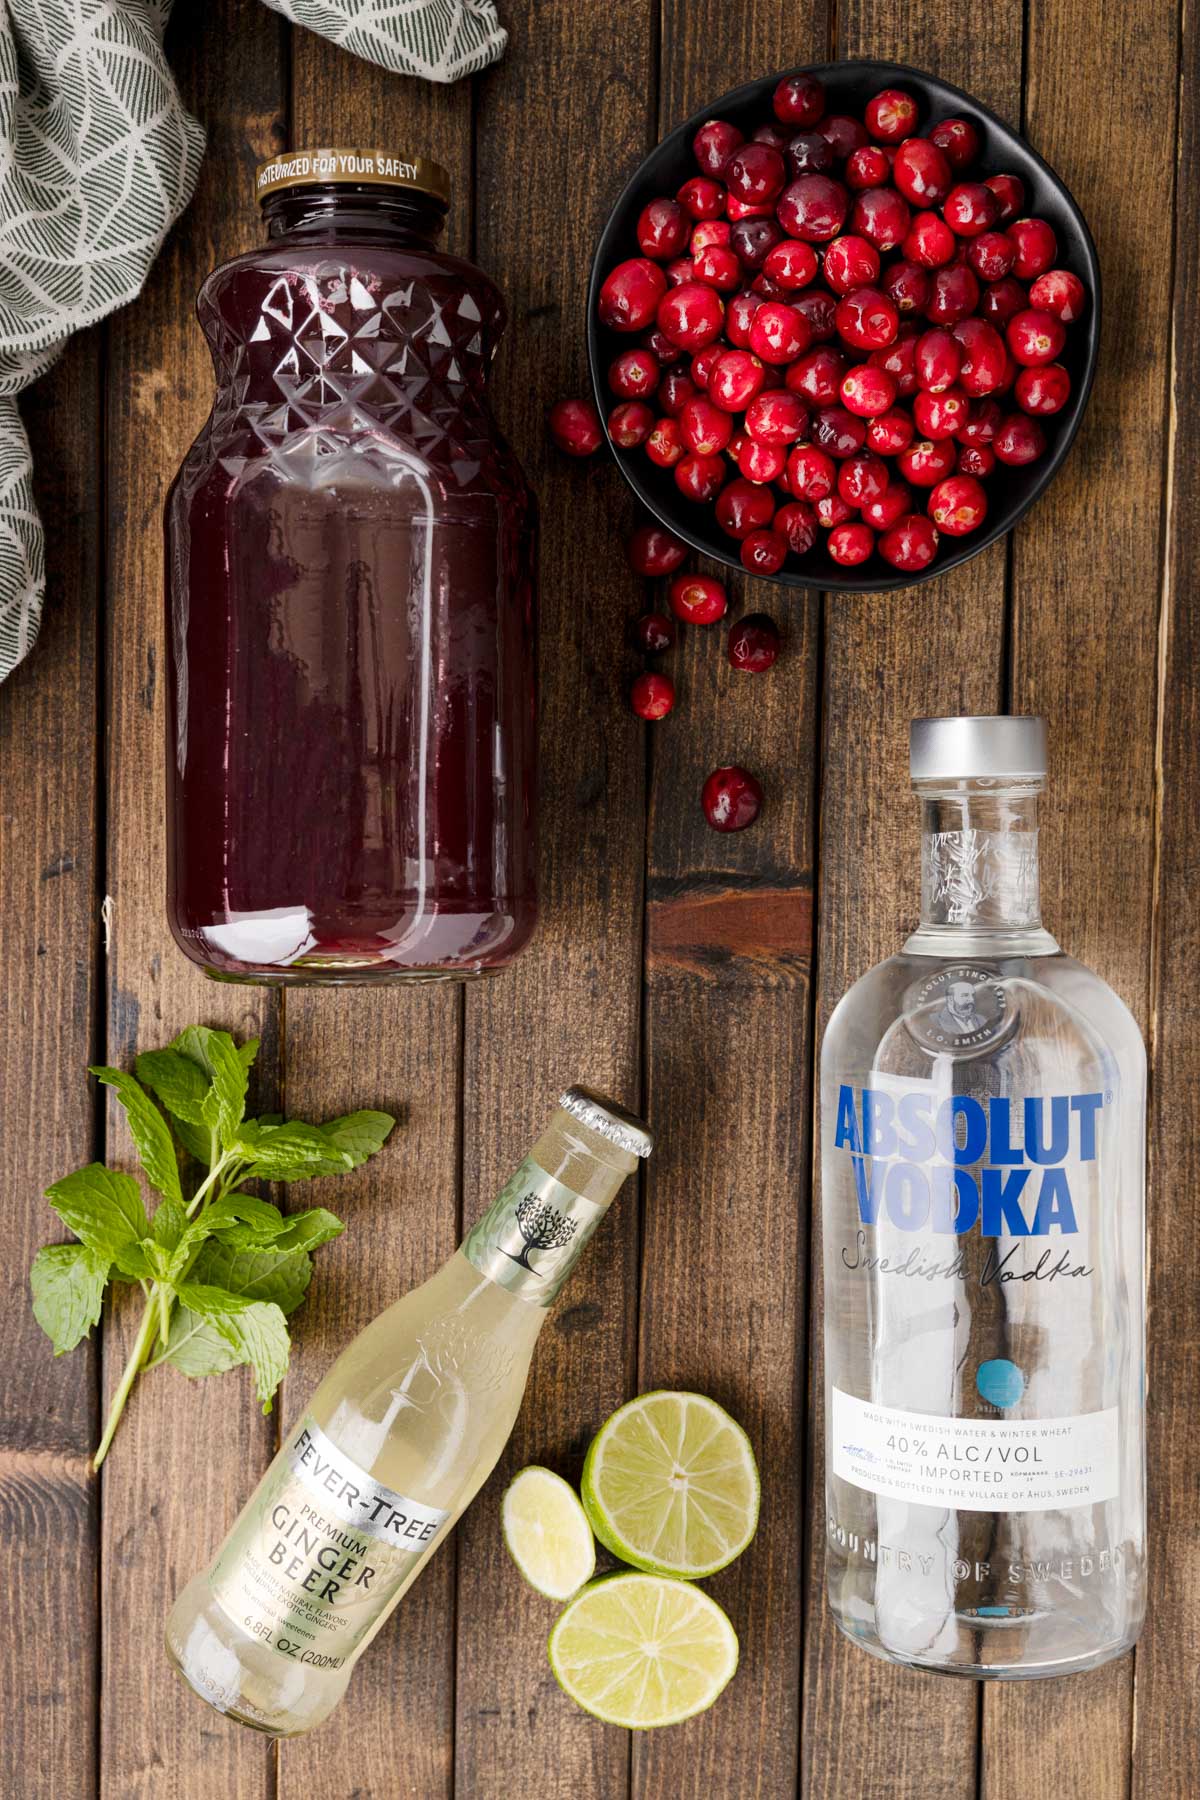 overhead photo of a bottle of cranberry juice, a bottle of Absolut vodka, and a bottle of Fever Tree ginger beer, on a wood board, with cranberries, lime wedges, and fresh mint